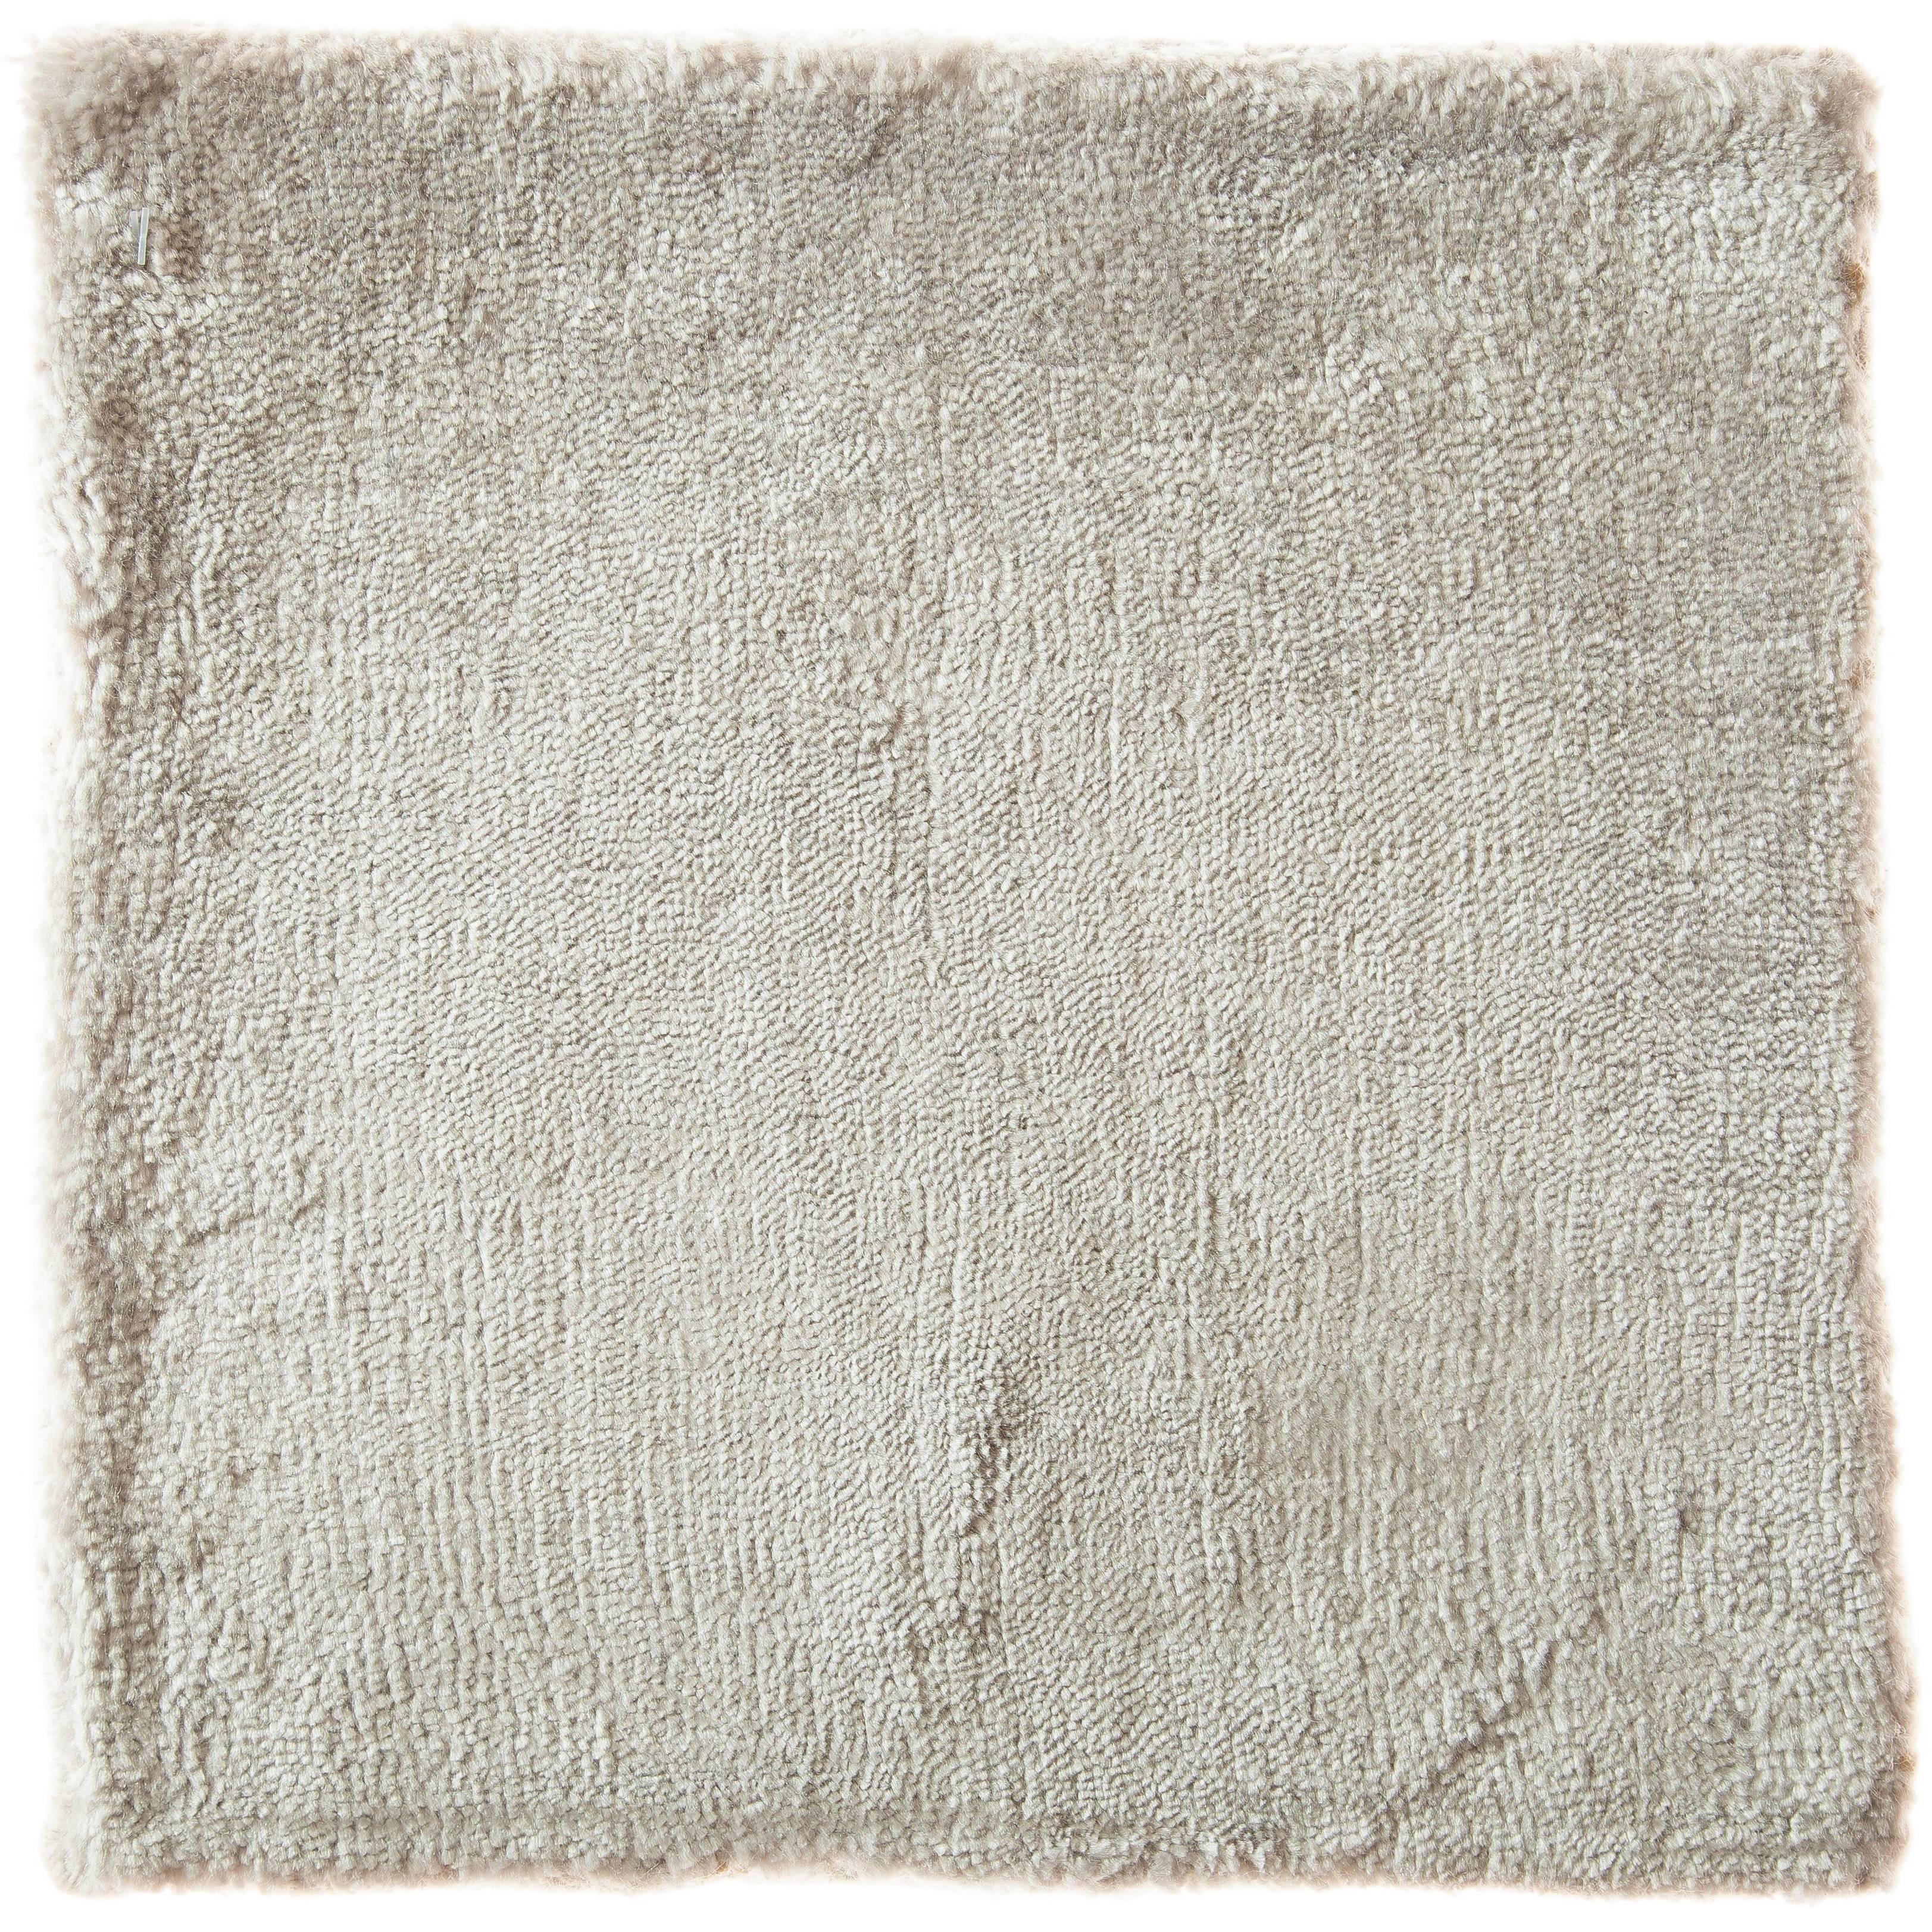 Ivory Opal Silver Tone Hand-Loom Solid Neutral Rug in Any Custom Size